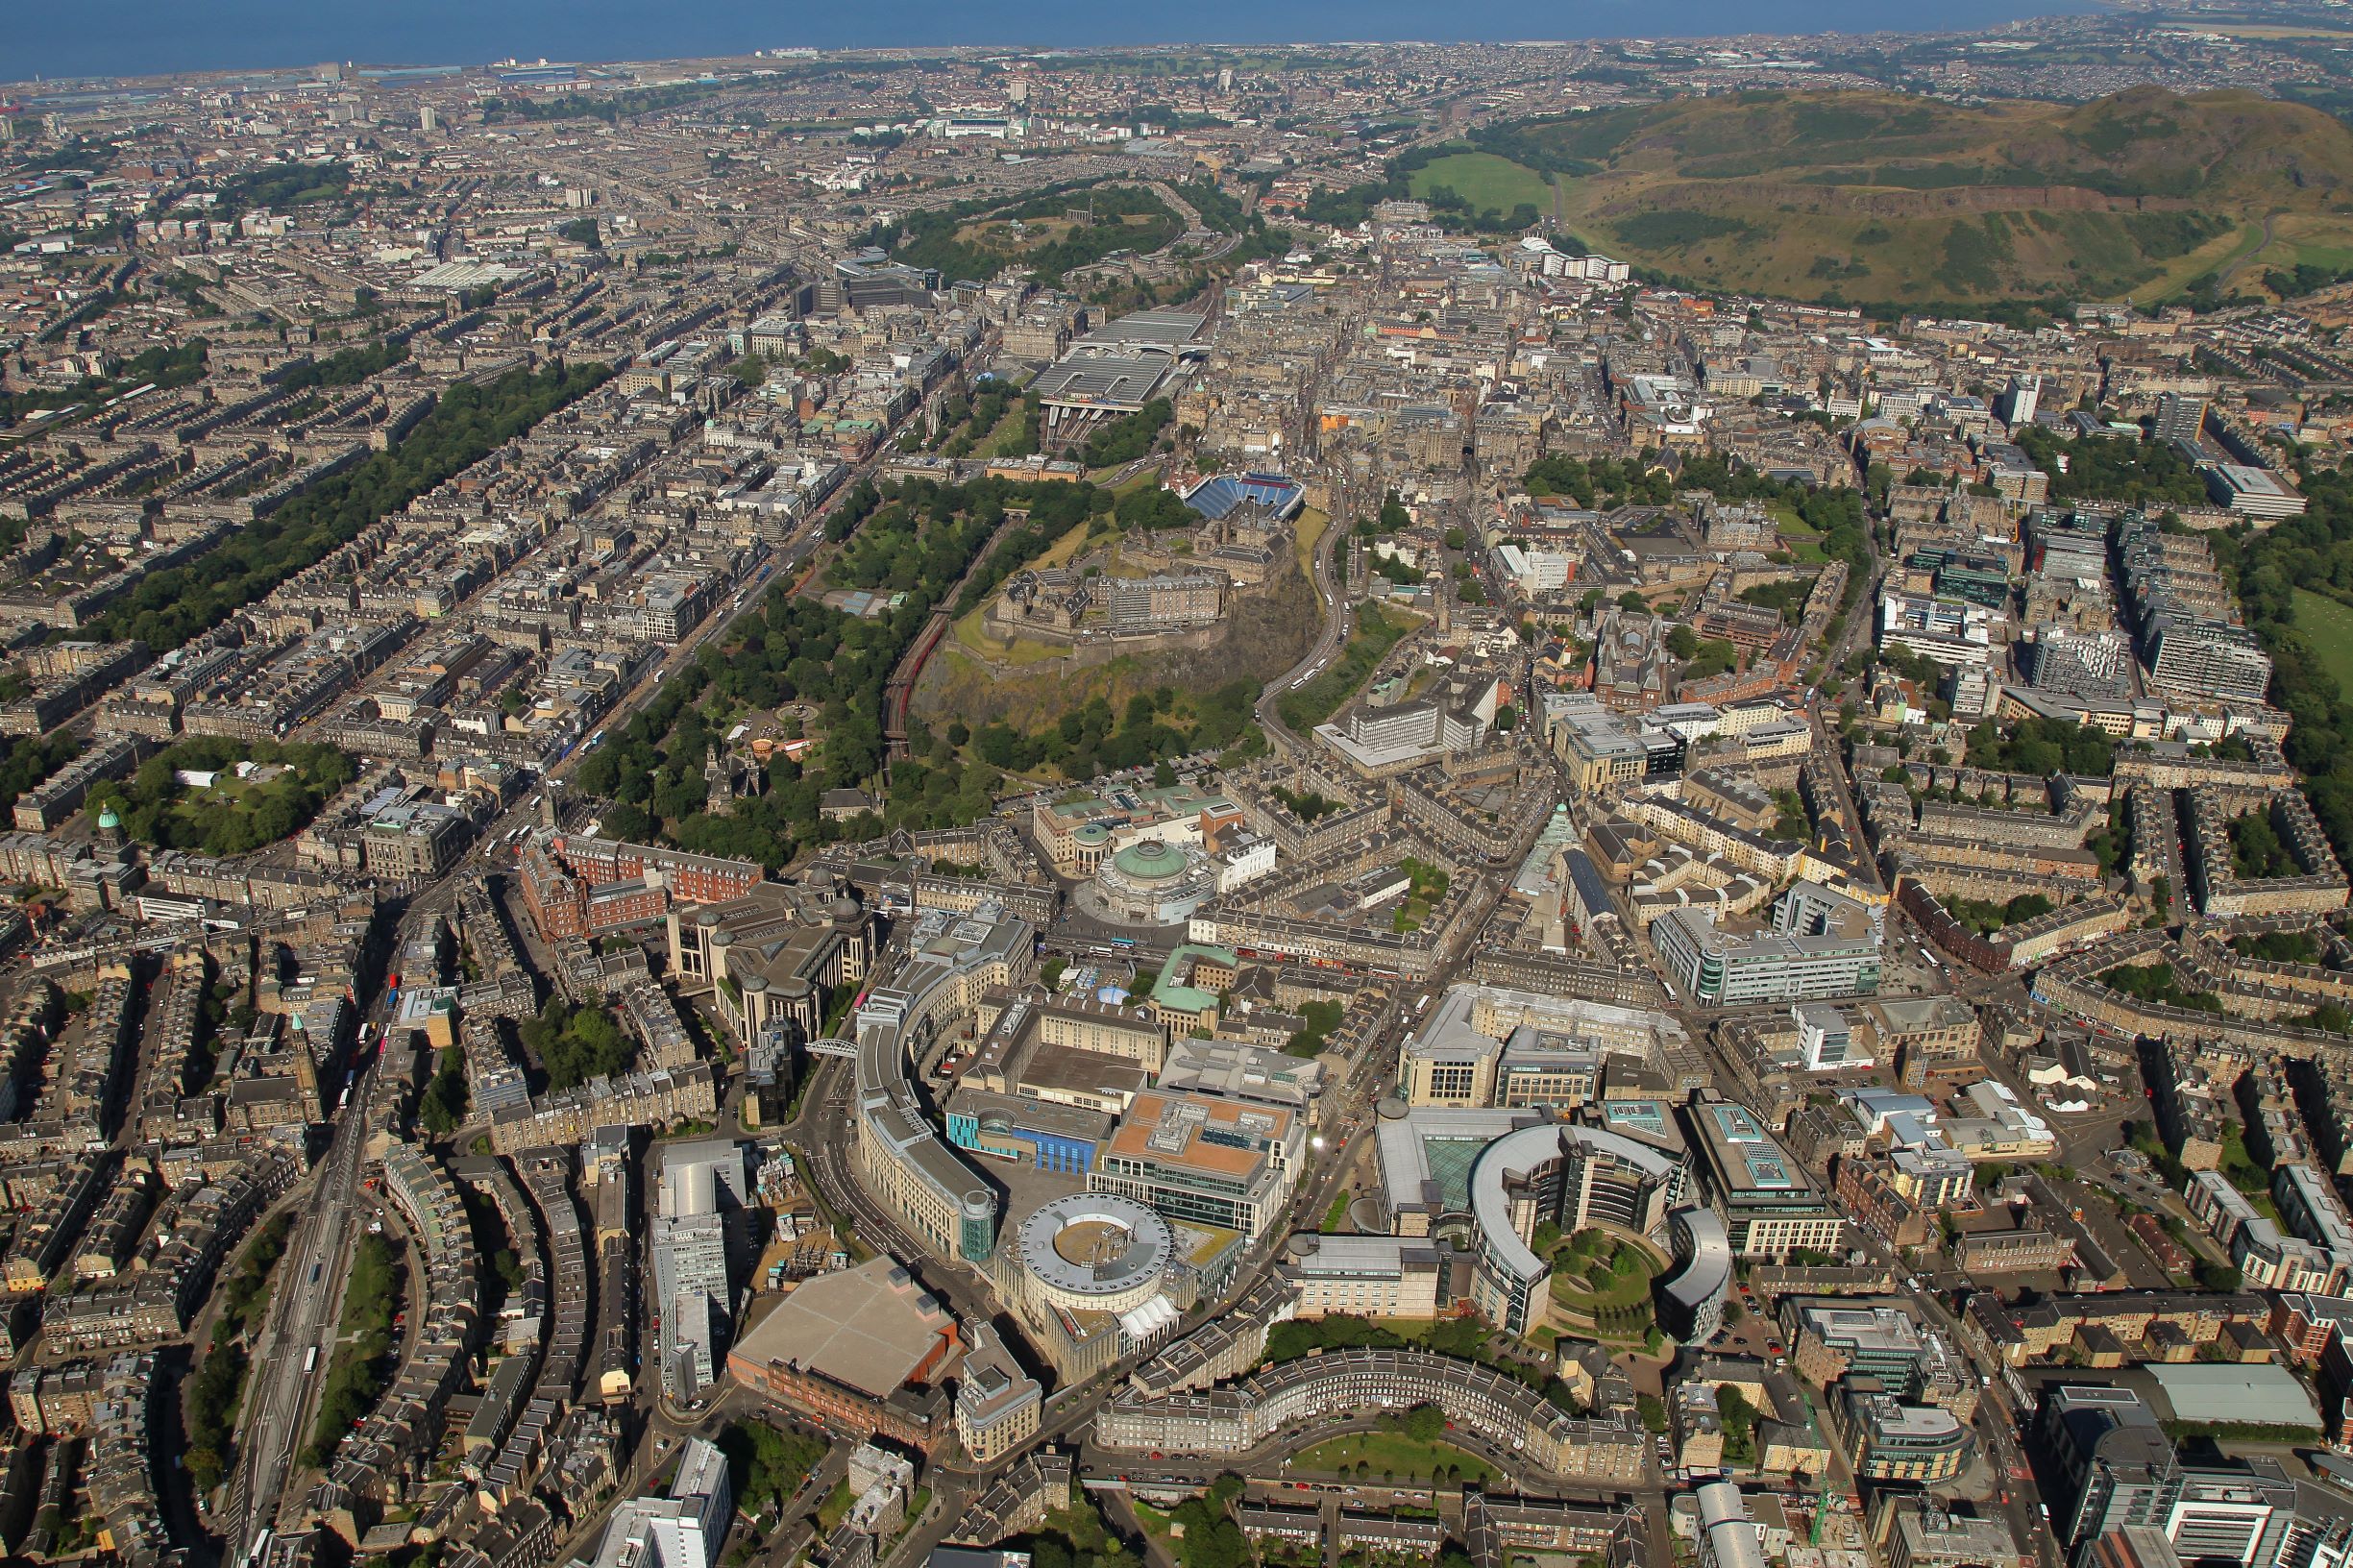 Council budget and housing revenue plans approved in Edinburgh